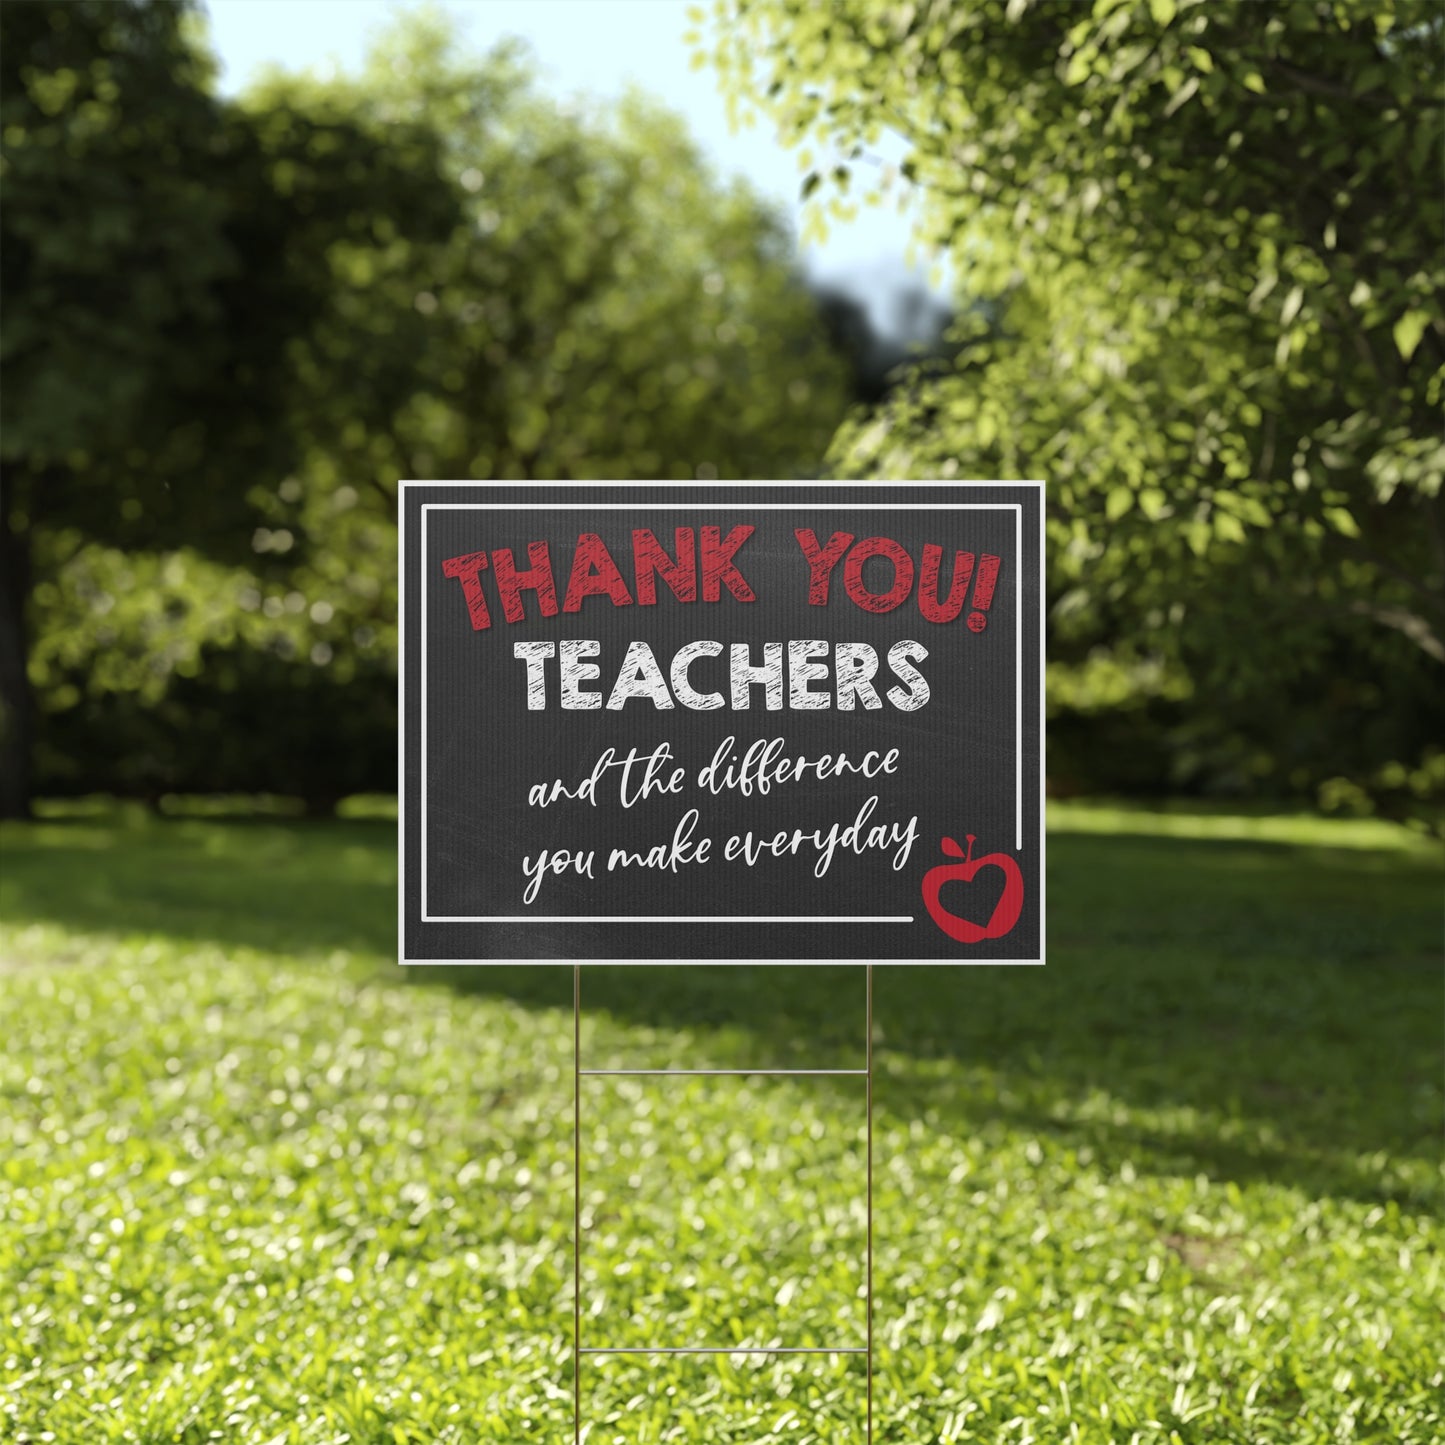 Thank You Teachers, The Difference You Make Everyday, Heart, Yard Sign, Printed 2-Sided -18 x 12,24x18 or 36x24, Metal H-Stake Included, v7